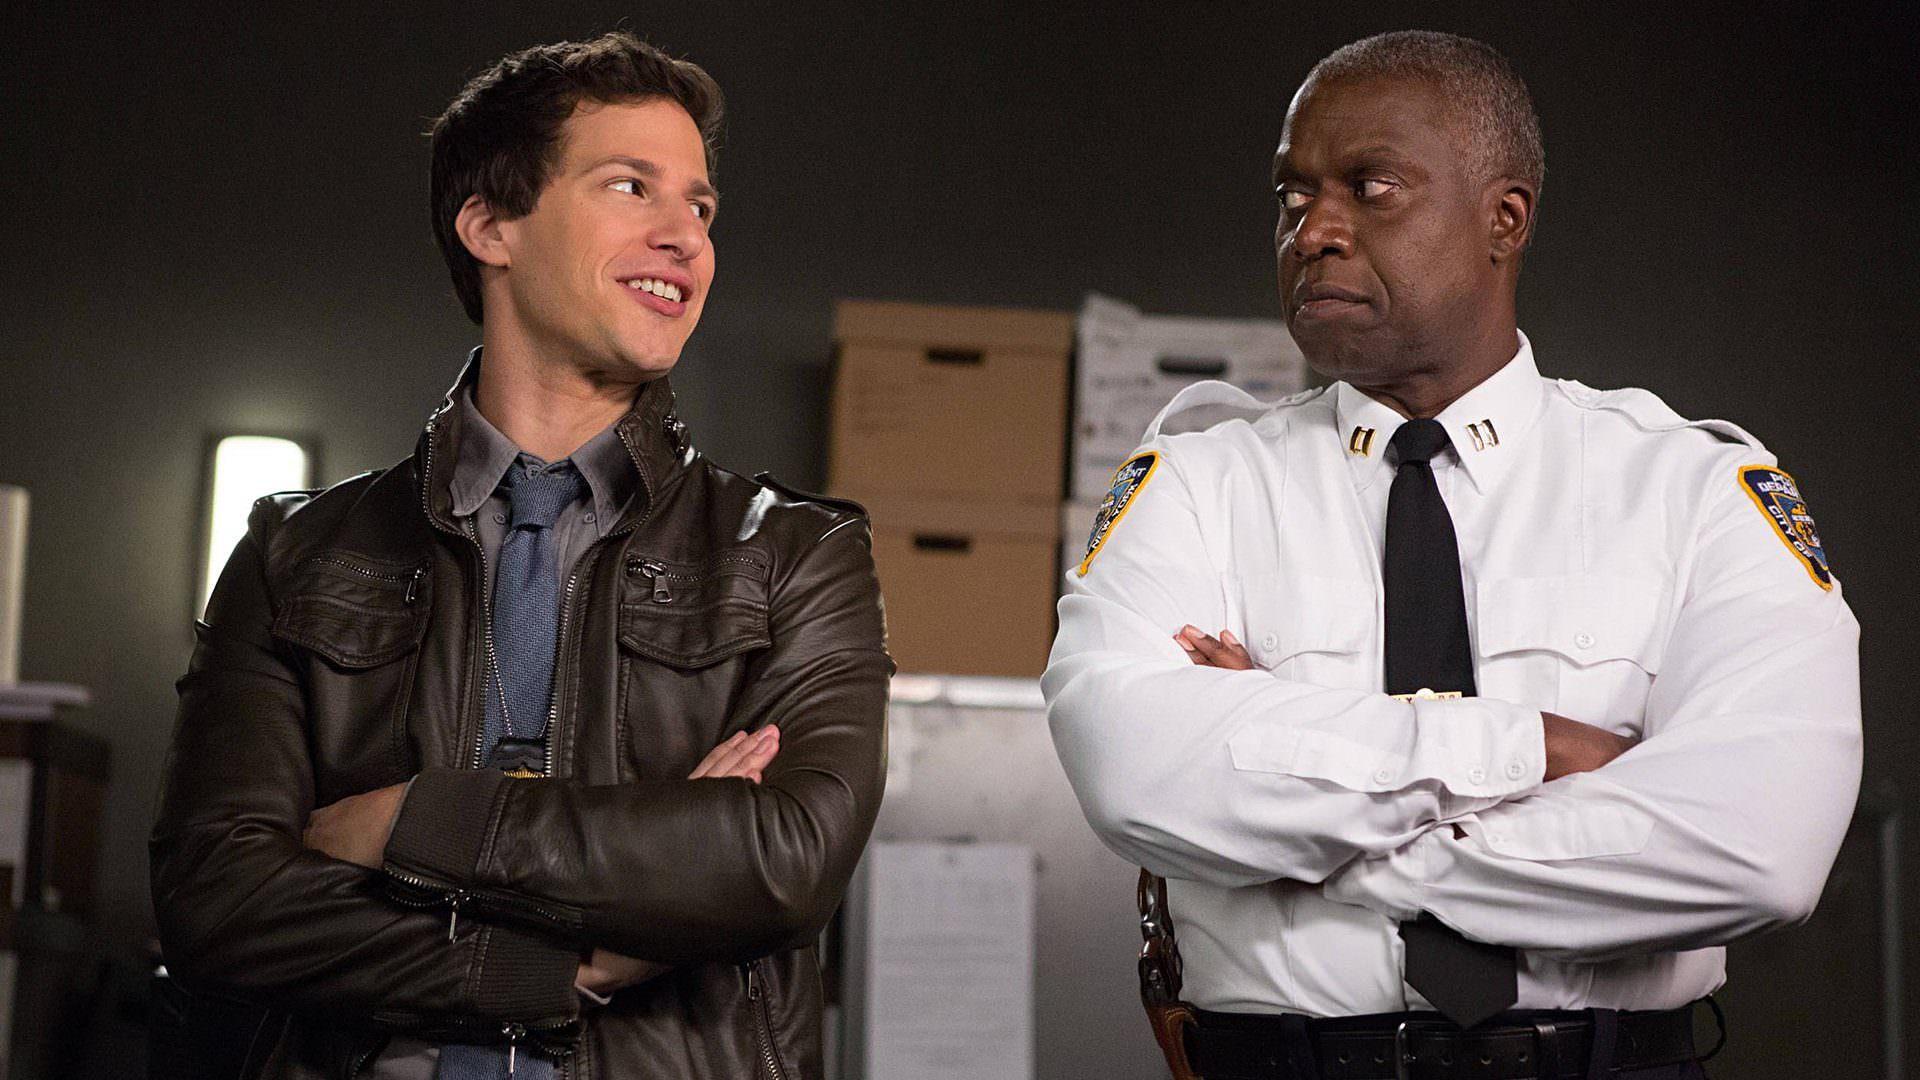 HD Wallpaper Of Jake Peralta And Captain Holt In Brooklyn Nine Nine